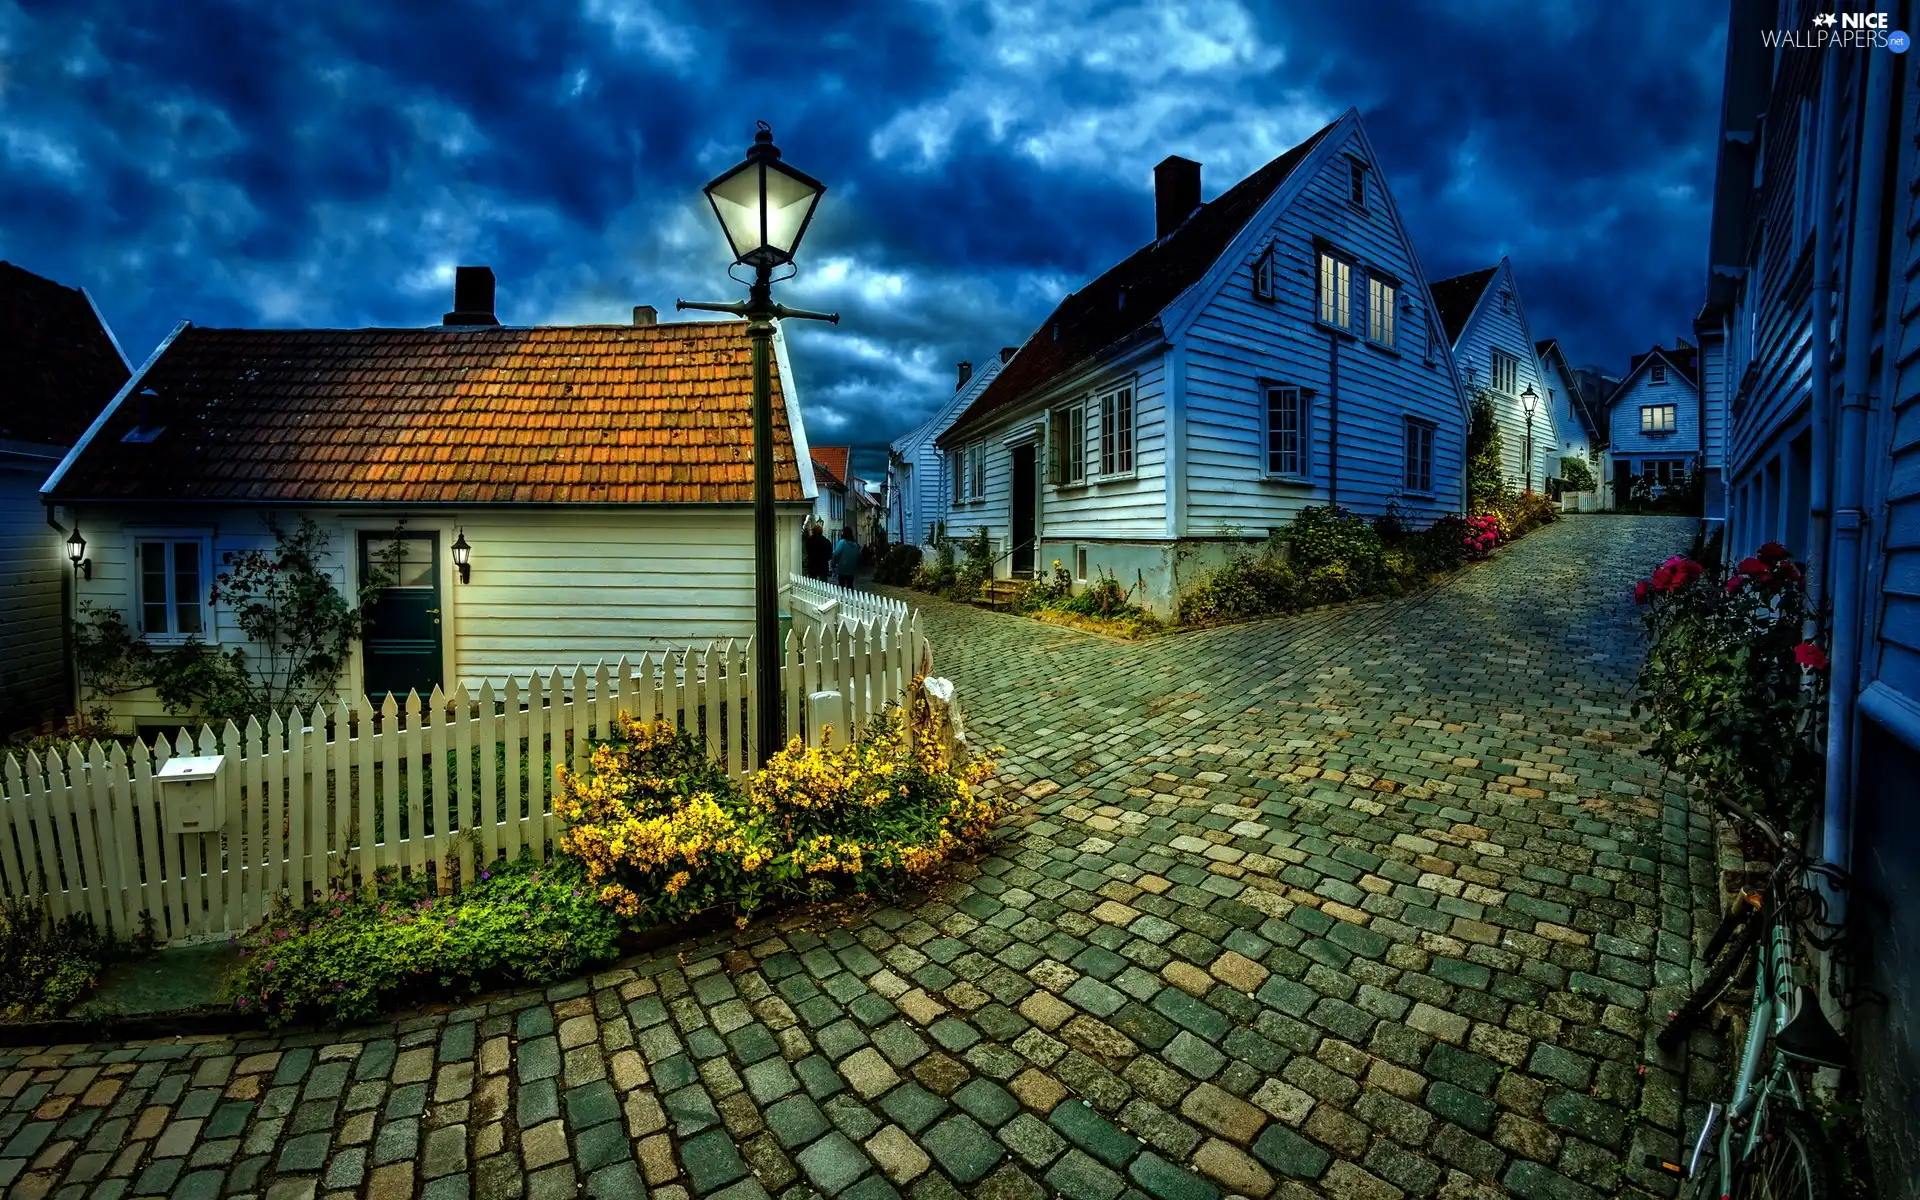 Street, perspective, Houses, paving, Town